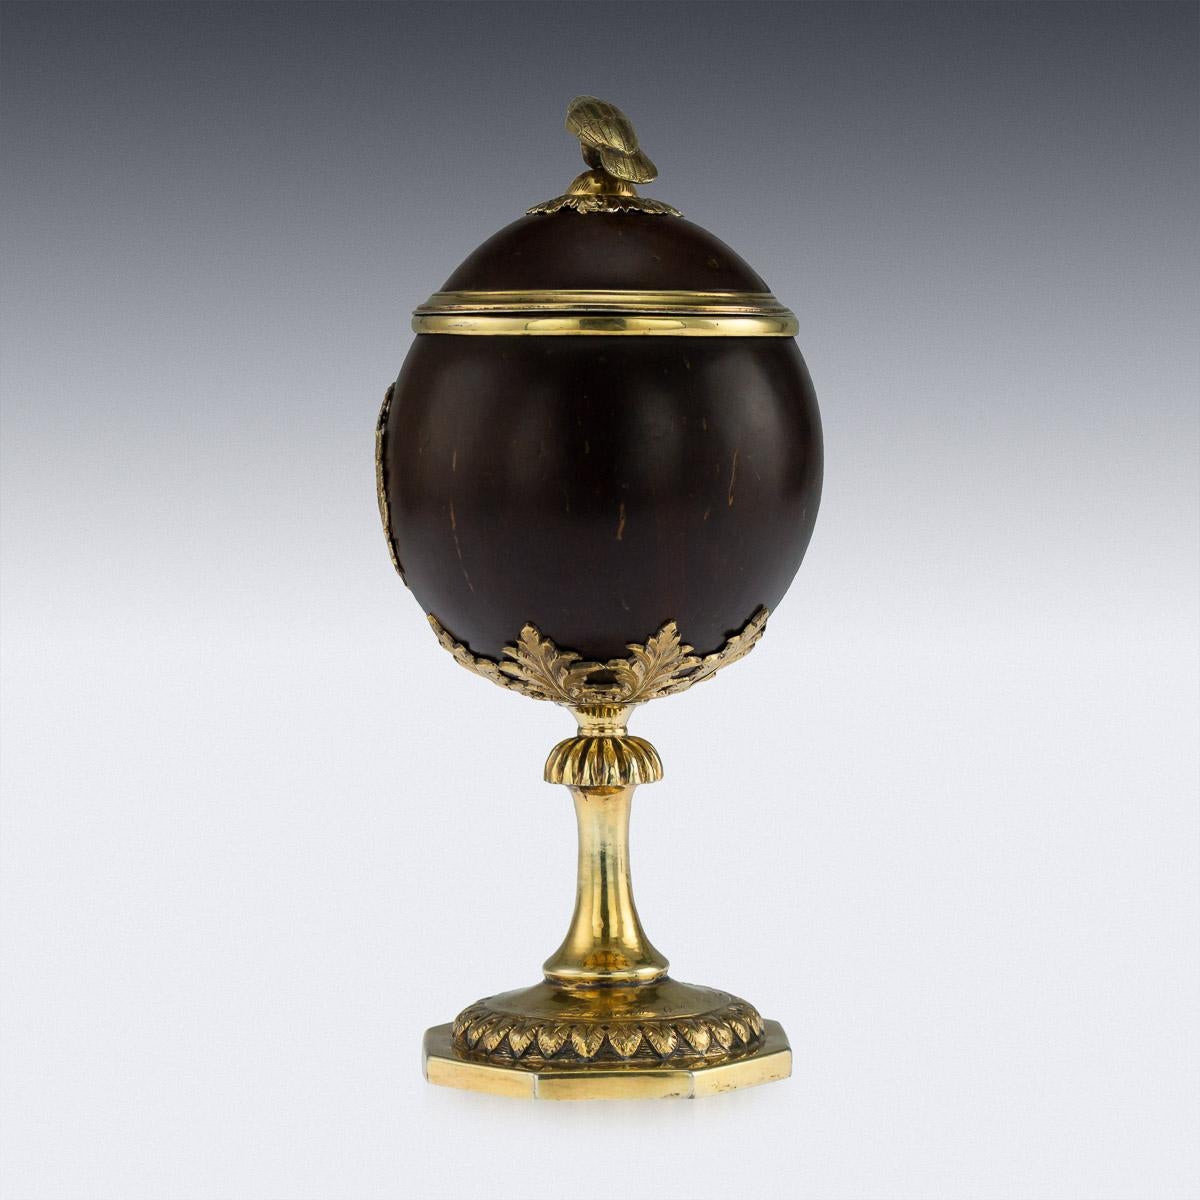 
Antique early 19th century Russian rare Provincial silver-gilt mounted coconut lidded cup, the coconut standing on a solid silver octagonal base, beautifully chased with acanthus leaves and engraved (1830 year, April 6th, sign of gratitude), the